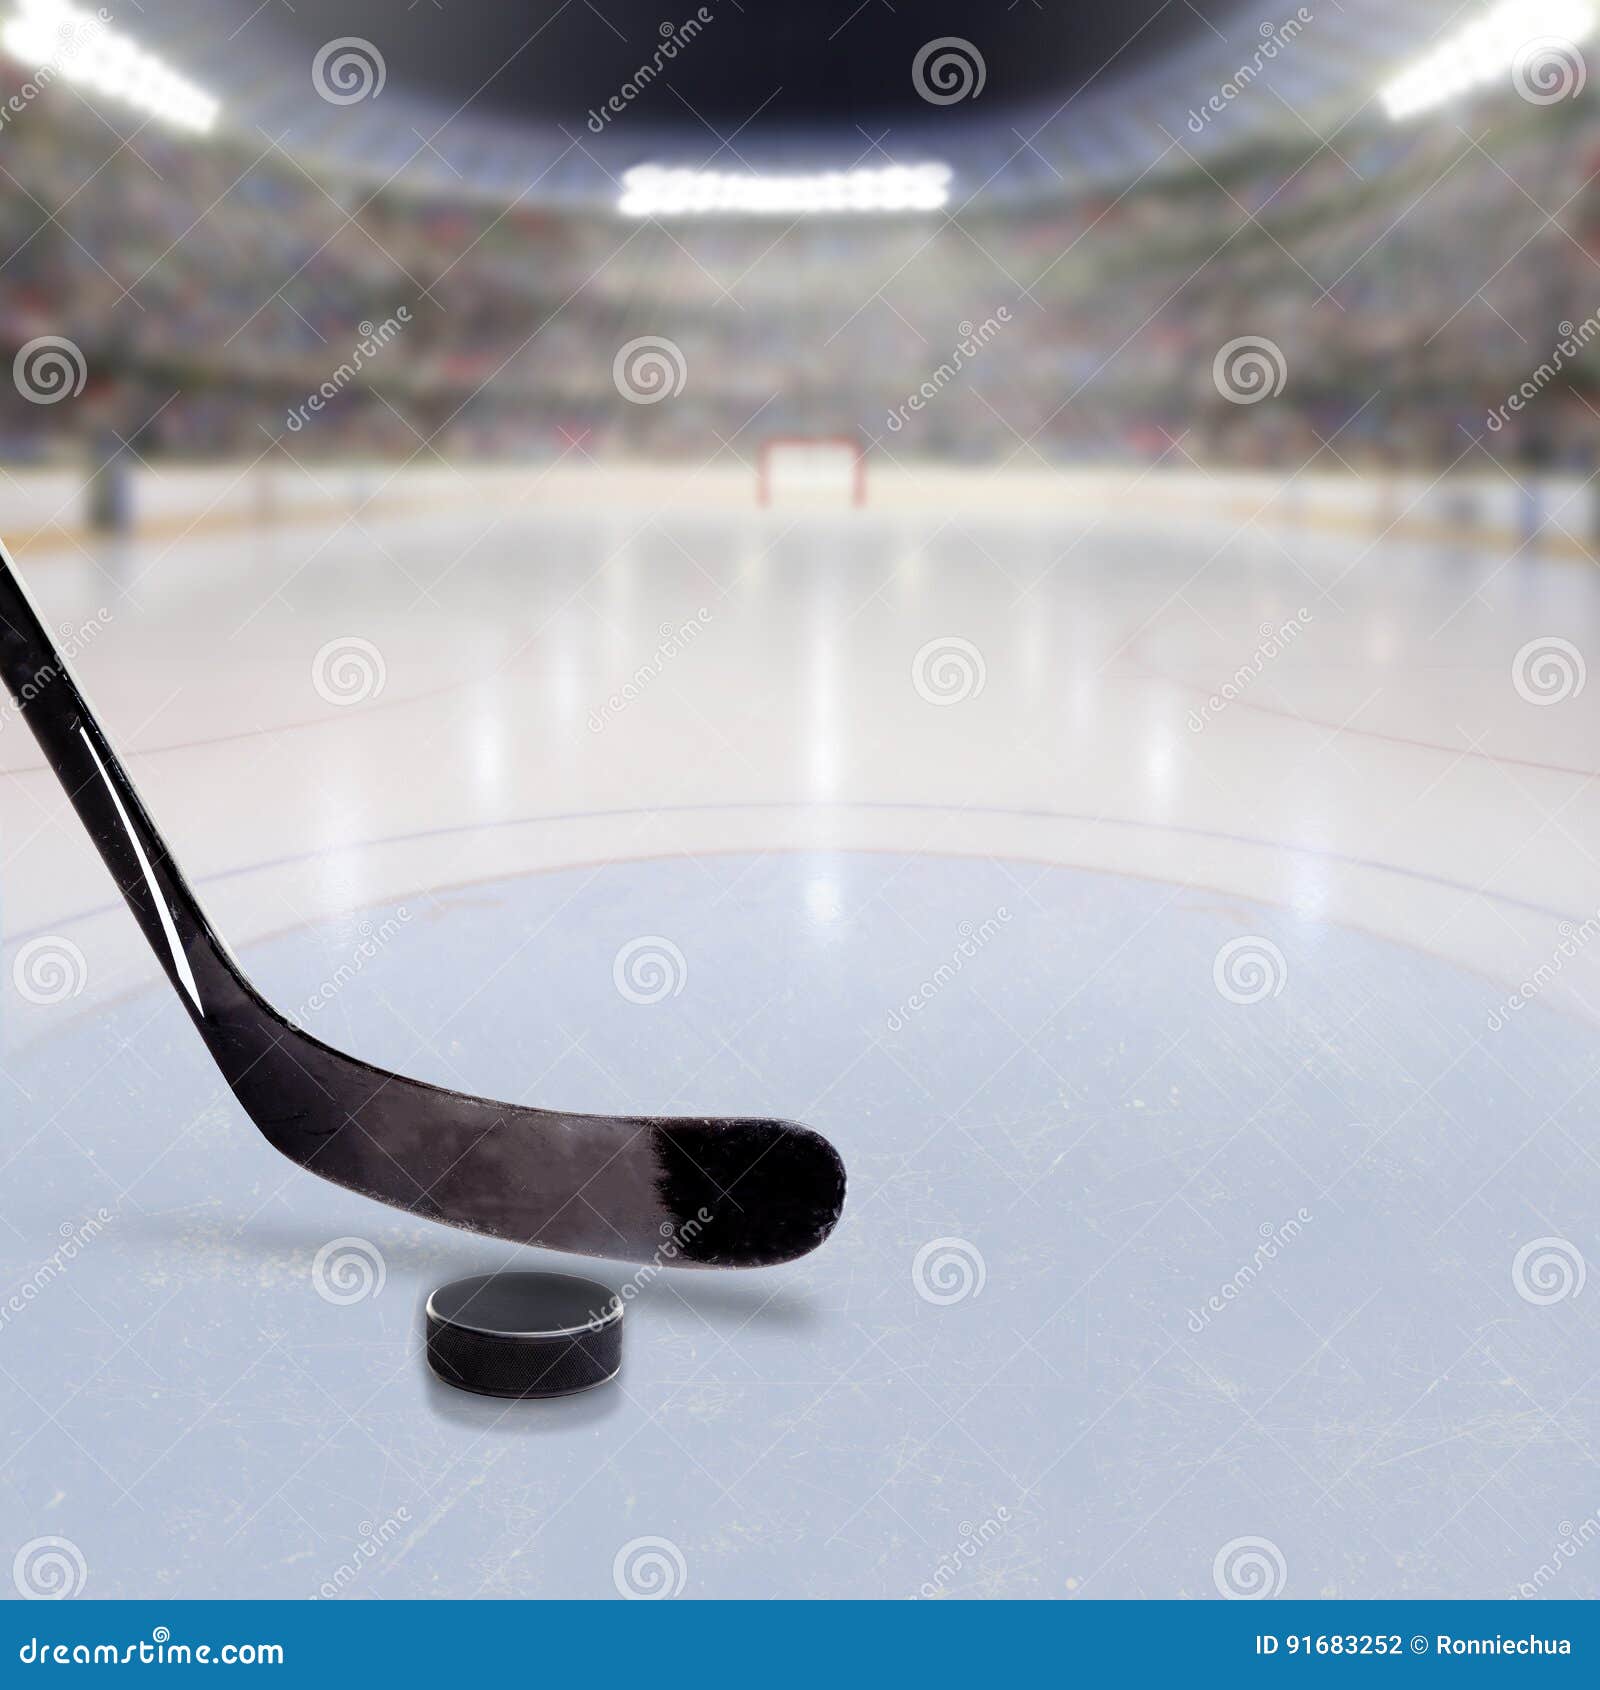 hockey stick and puck on ice of crowded arena